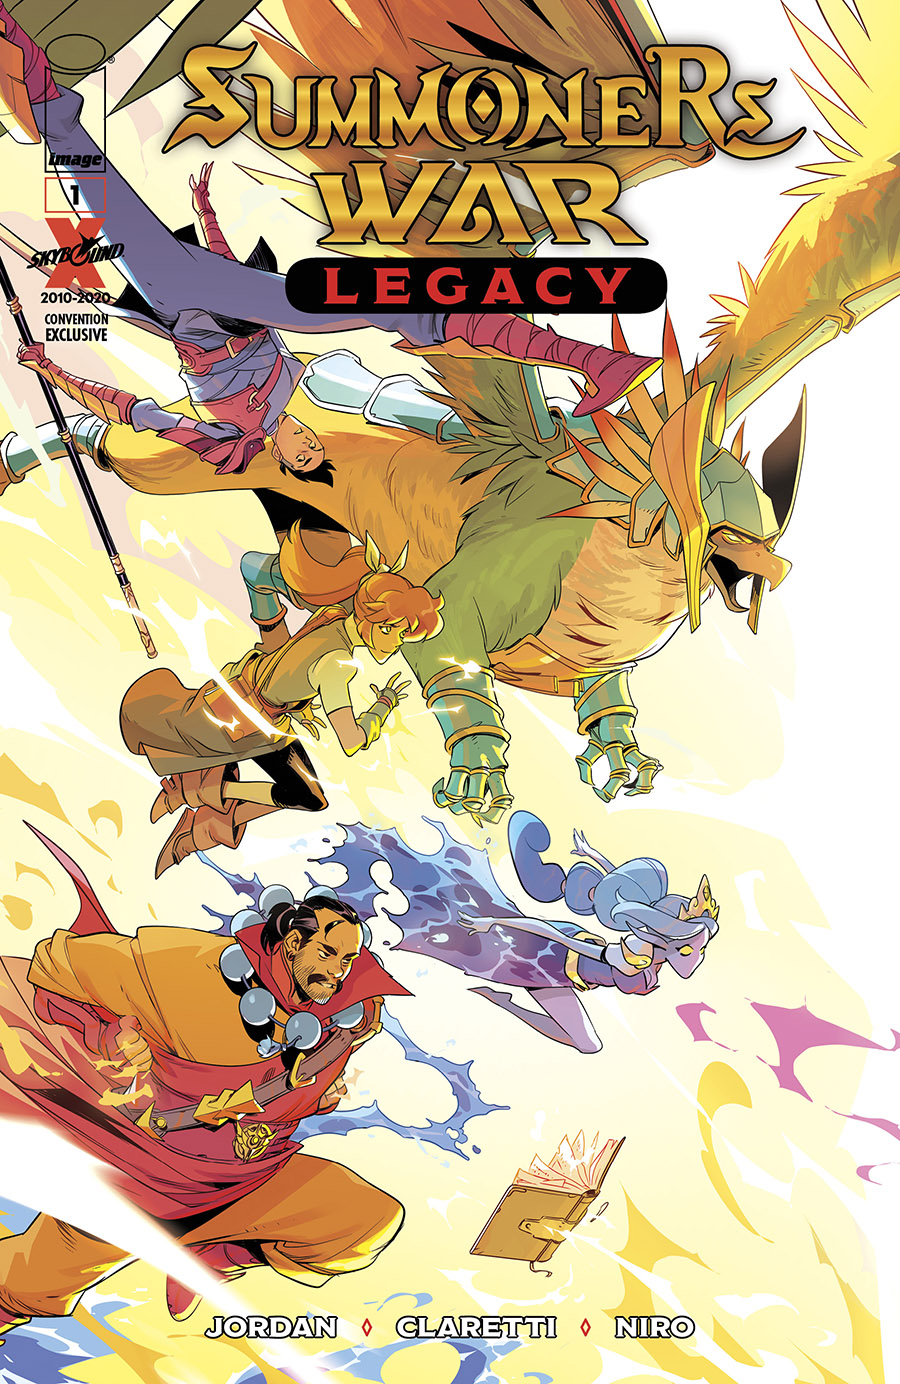 Summoners War: Legacy #1 Cover A